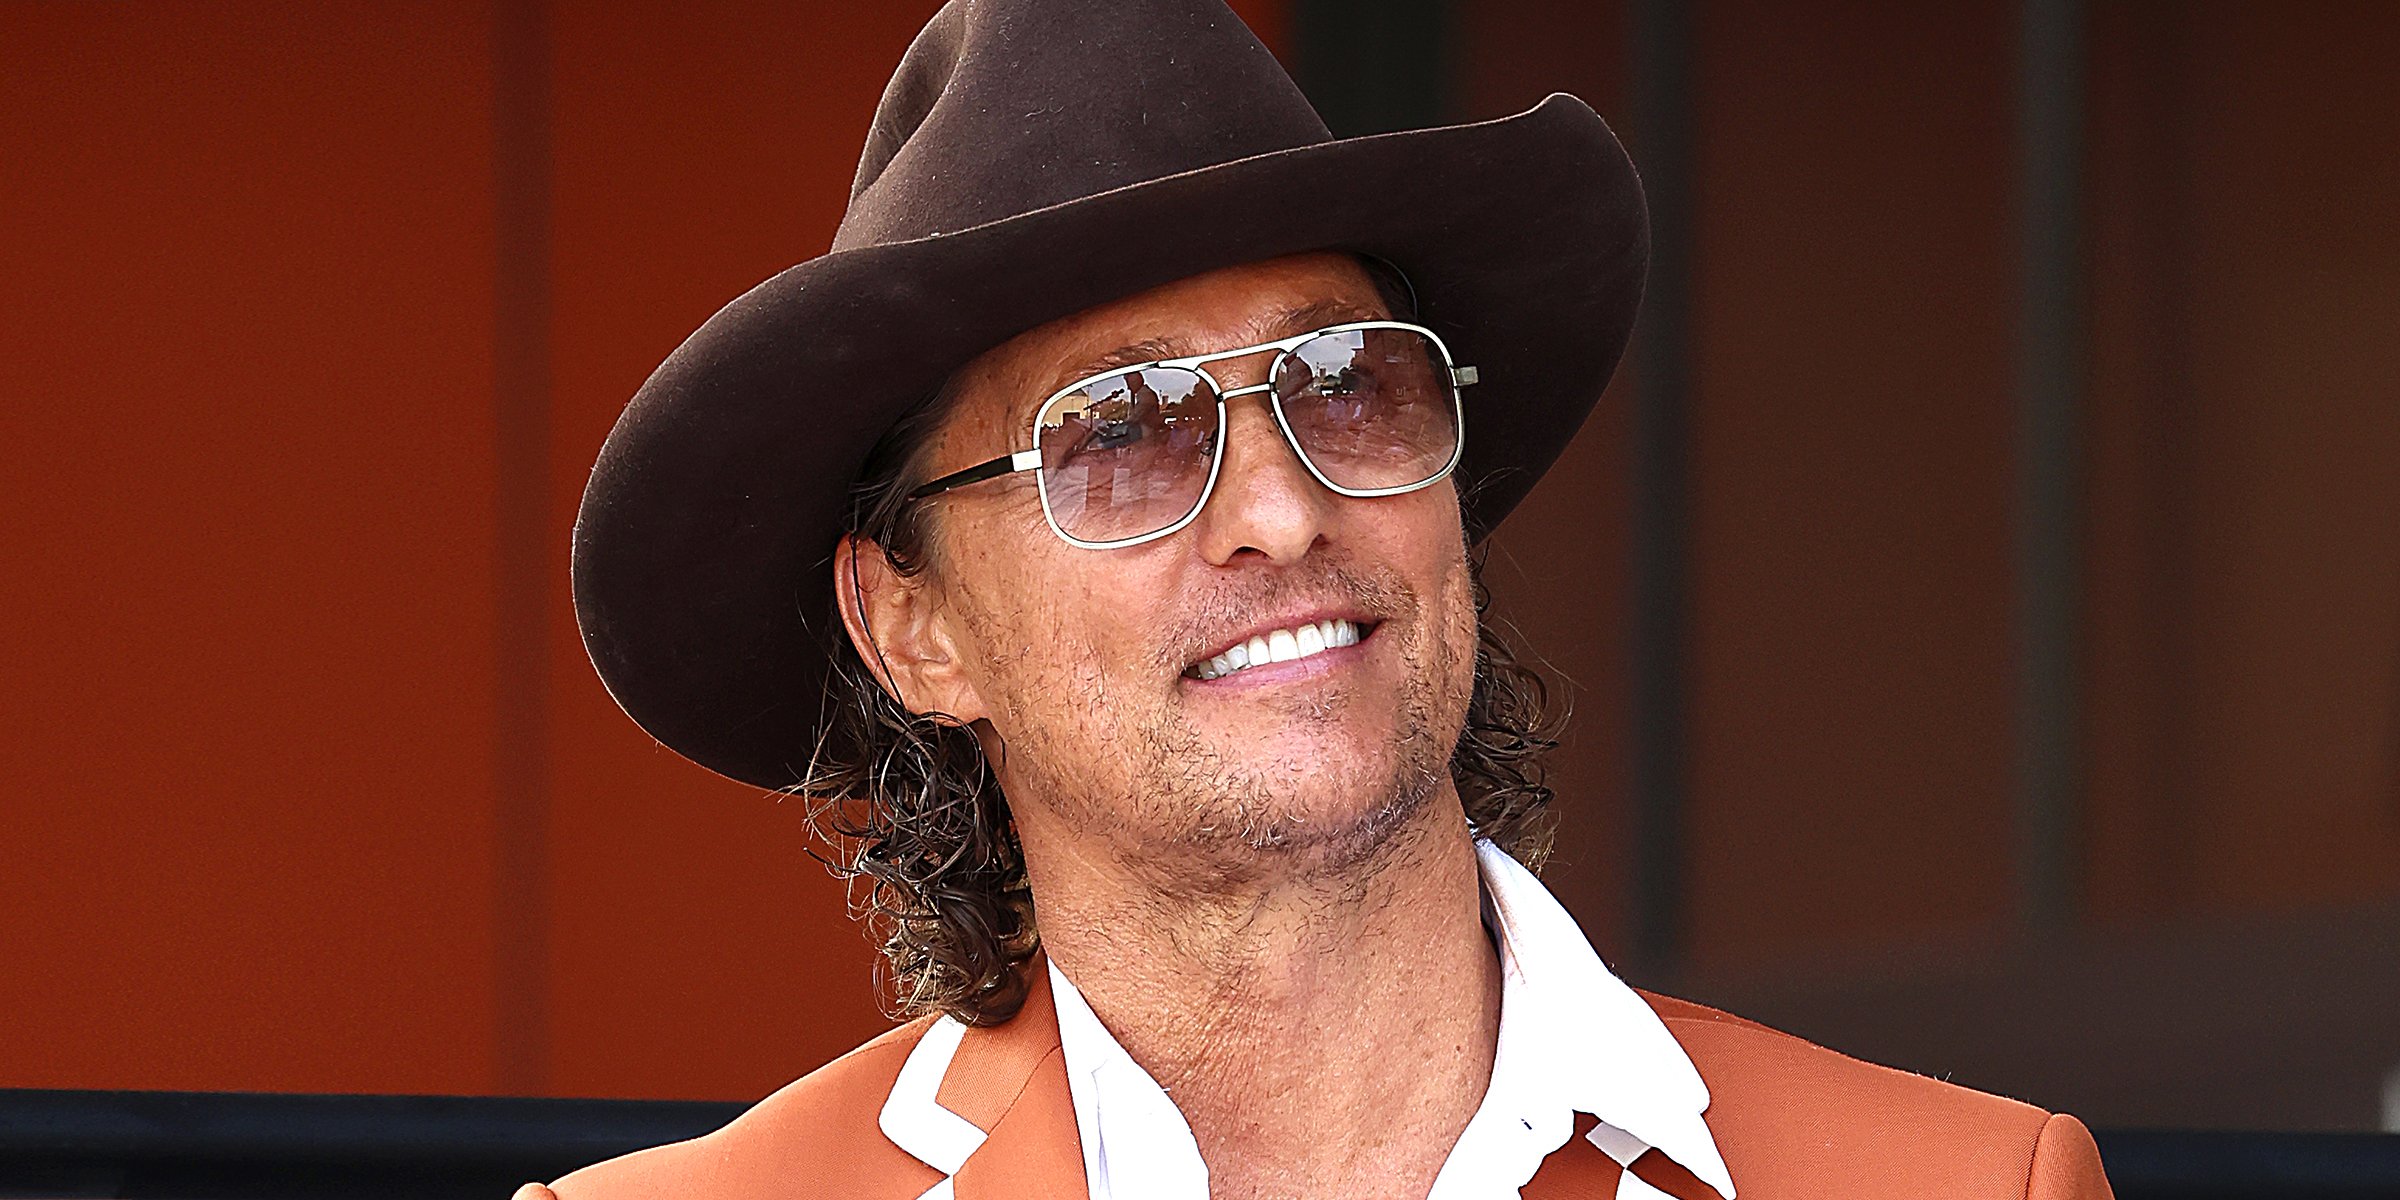 Matthew McConaughey┃Source: Getty Images